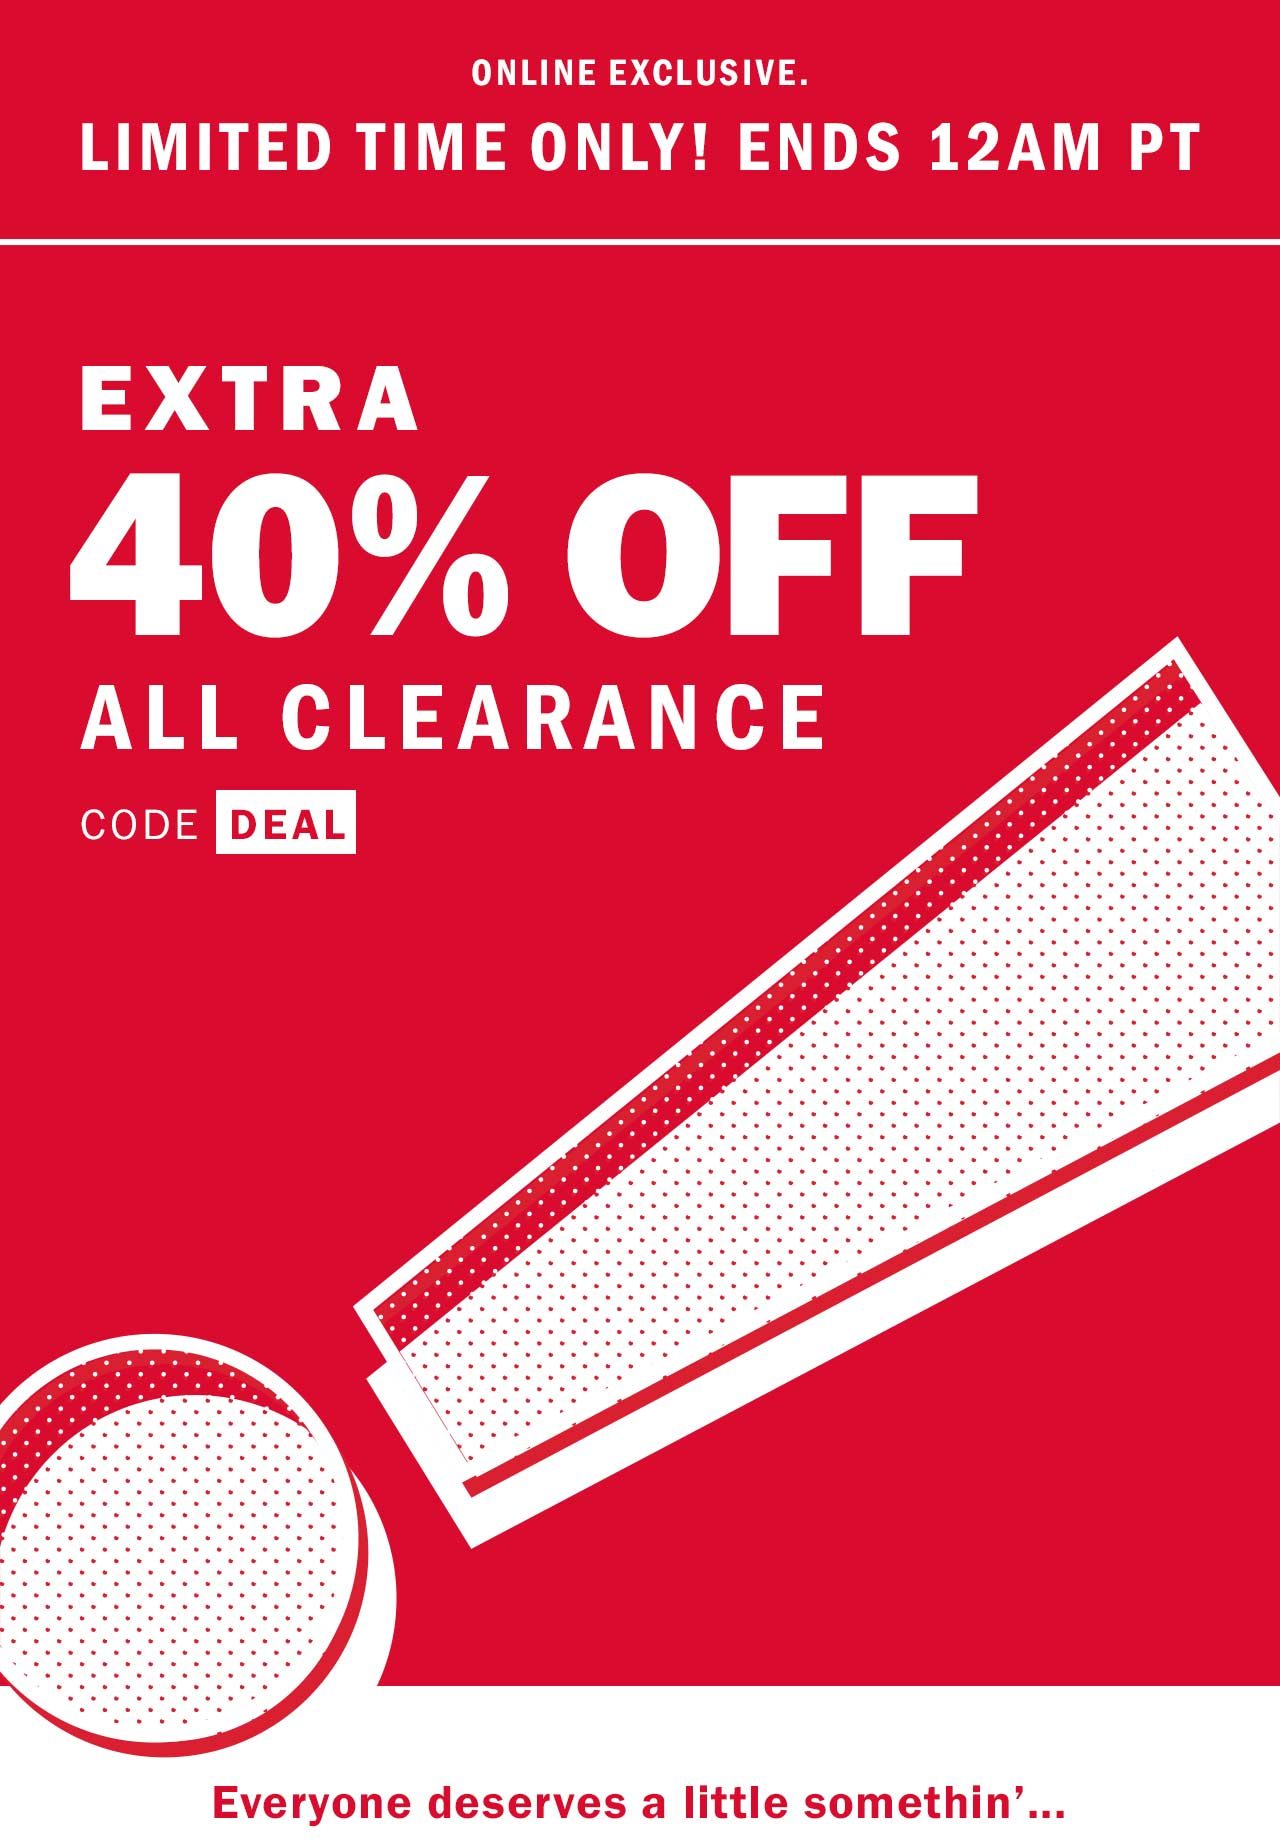 EXTRA 40% OFF ALL CLEARANCE